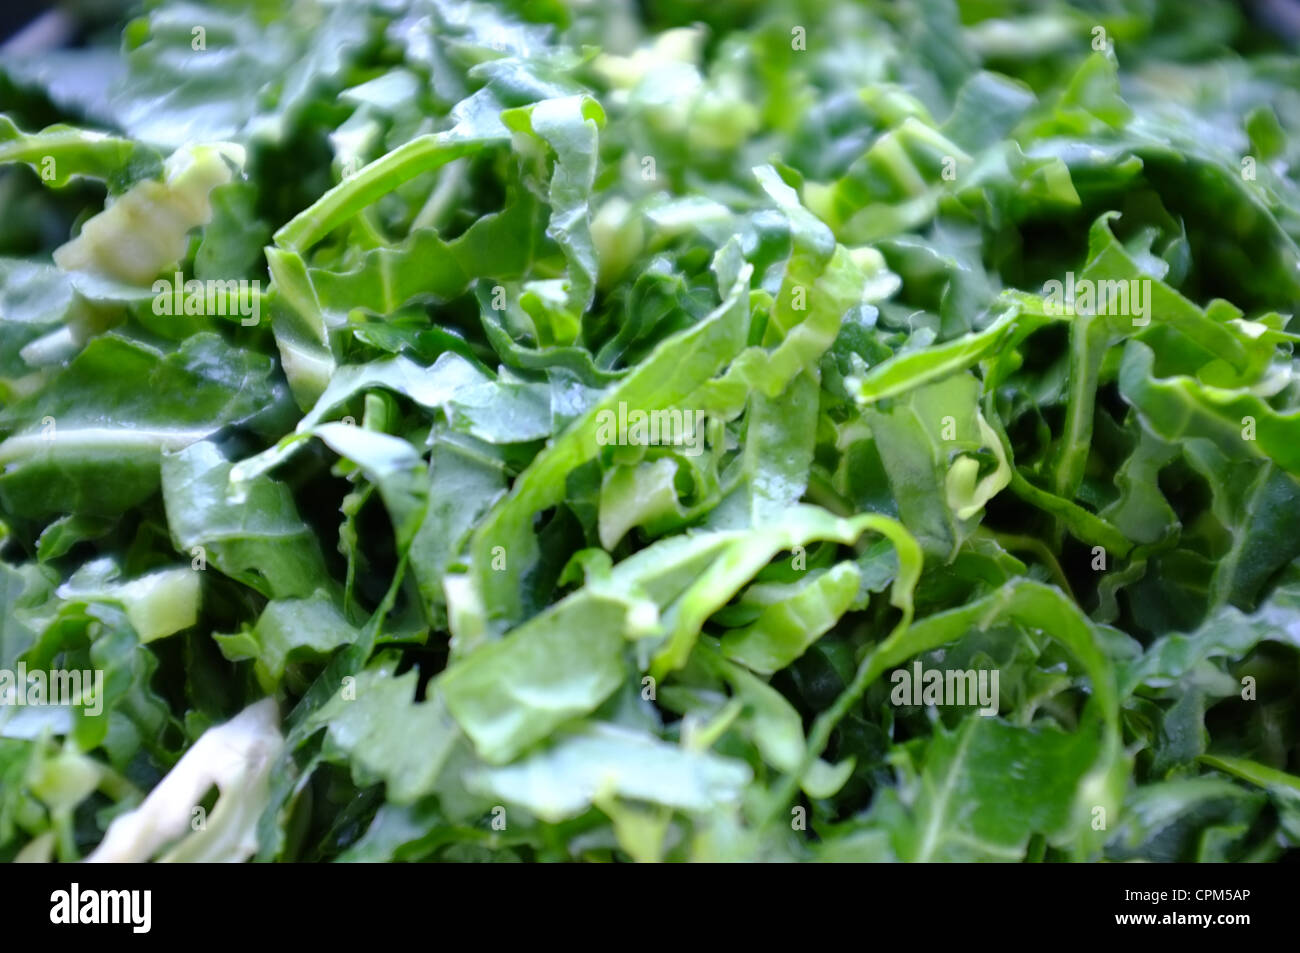 Green cabbage/Spring Greens chopped and prepared for steaming Stock Photo